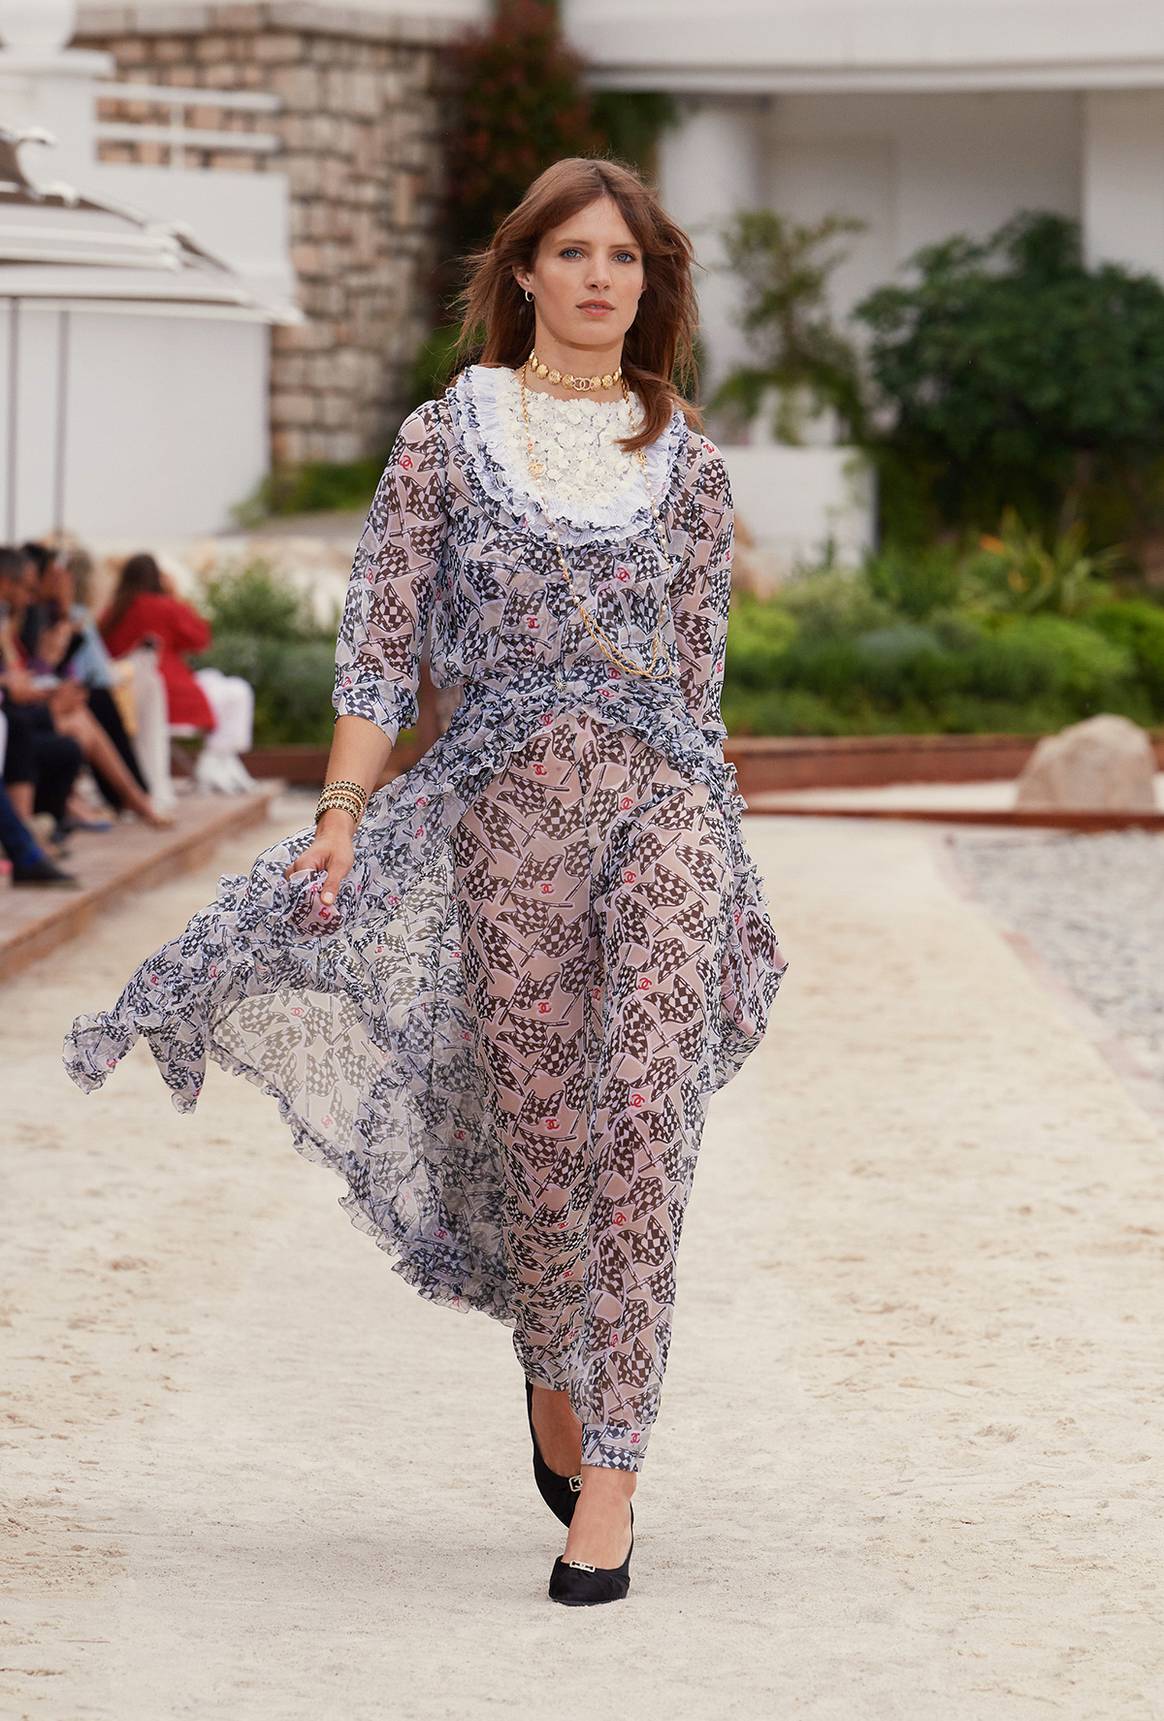 Relaxed airs and tributes in Chanel's Cruise collection 2022/2023